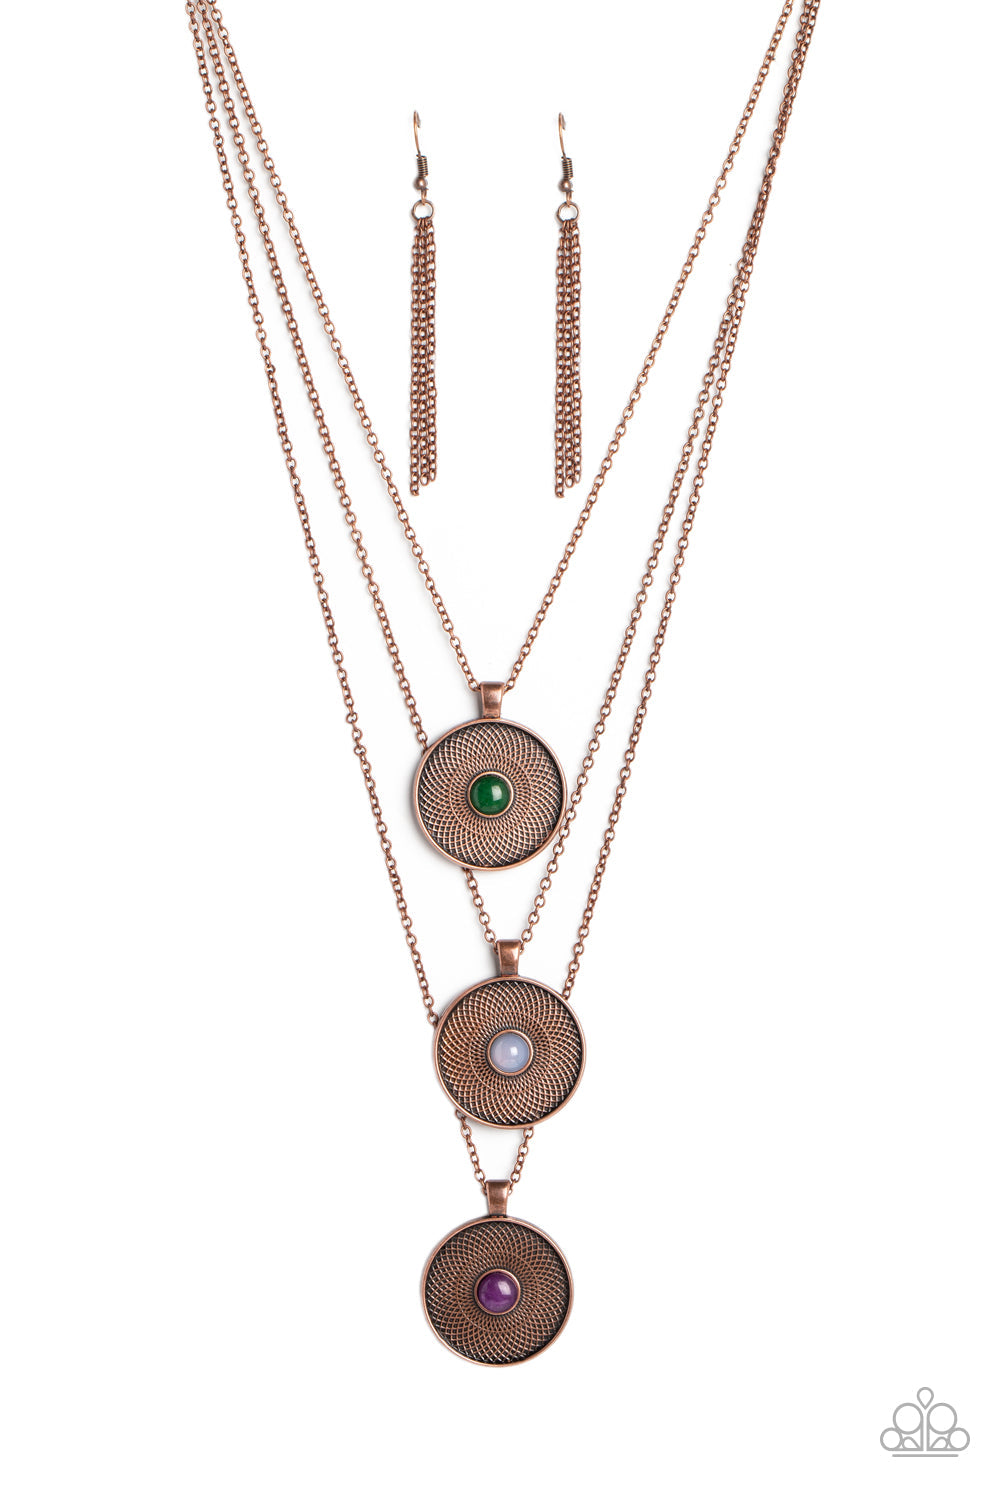 Geographic Grace - Copper Necklace - Paparazzi Accessories - Stamped with a floral motif, oversized copper pendants trickle from three layered chains below the neckline for a casual style. Featured in the center of each disc, a jade, opal white, and amethyst stone create a pop of color against the textured backdrop.